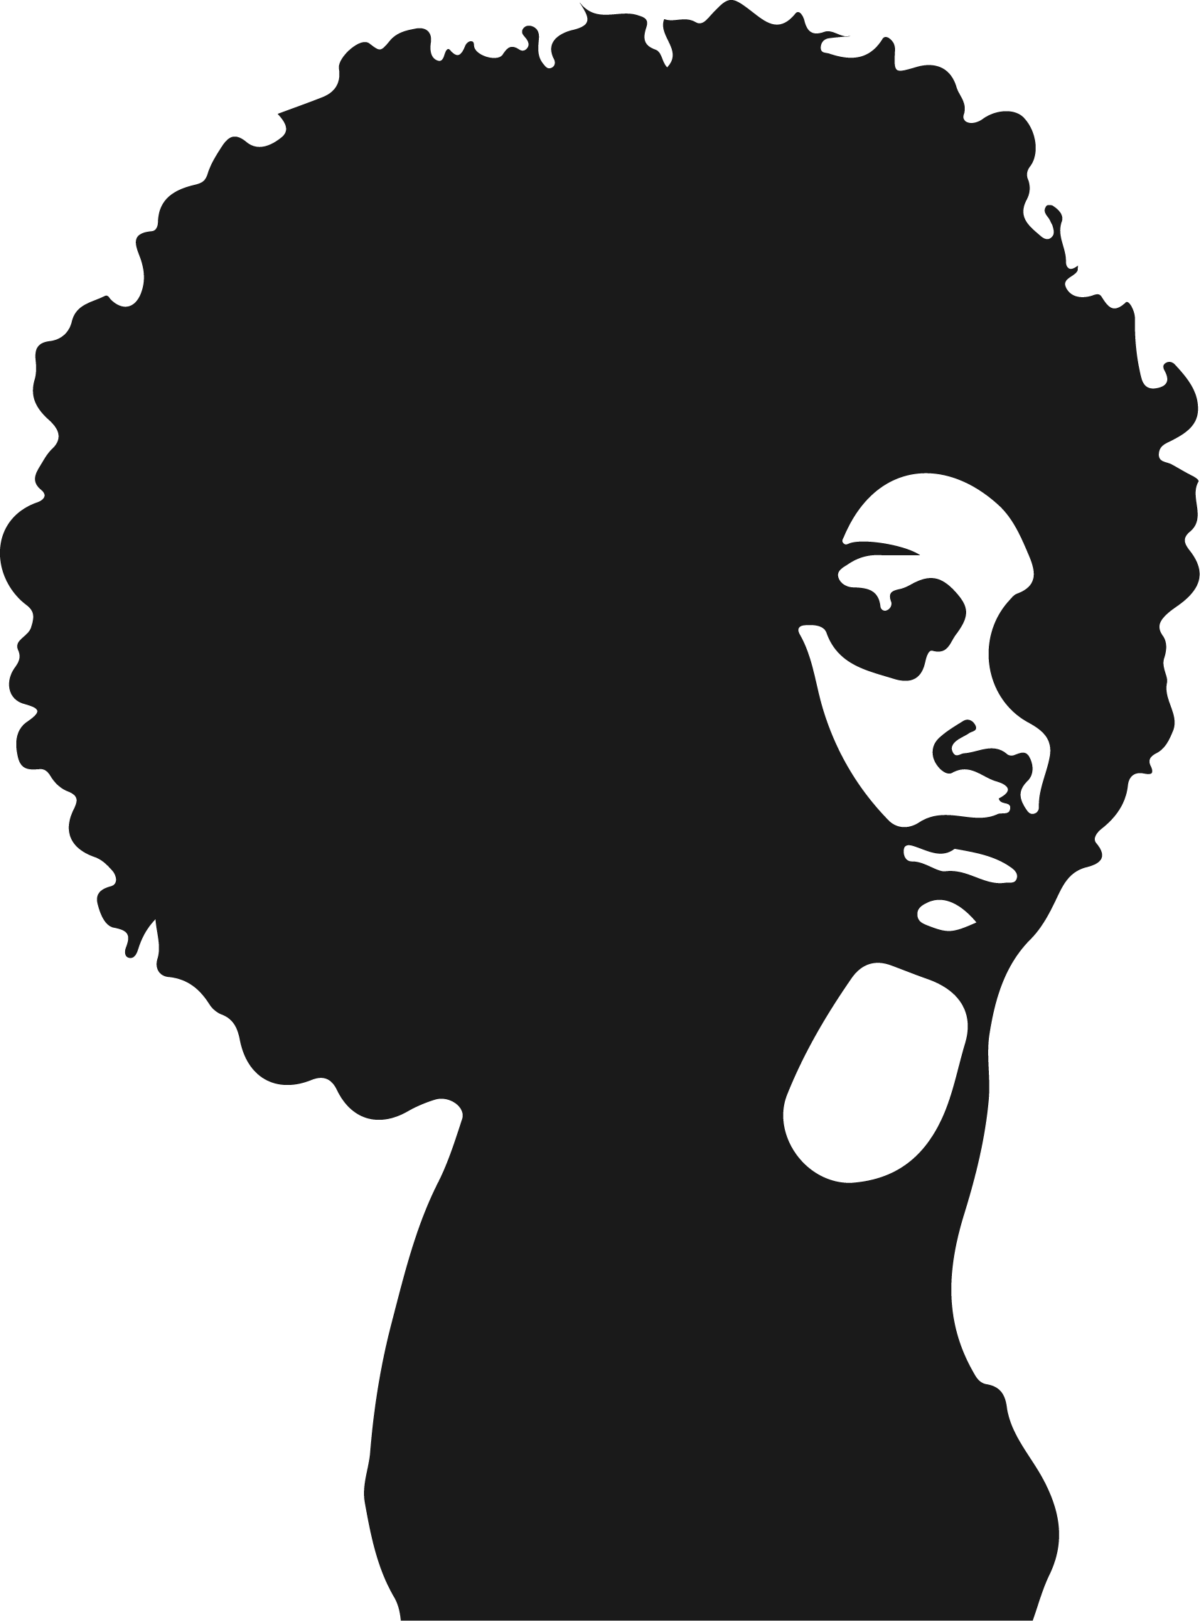 Afro silhouette Svg